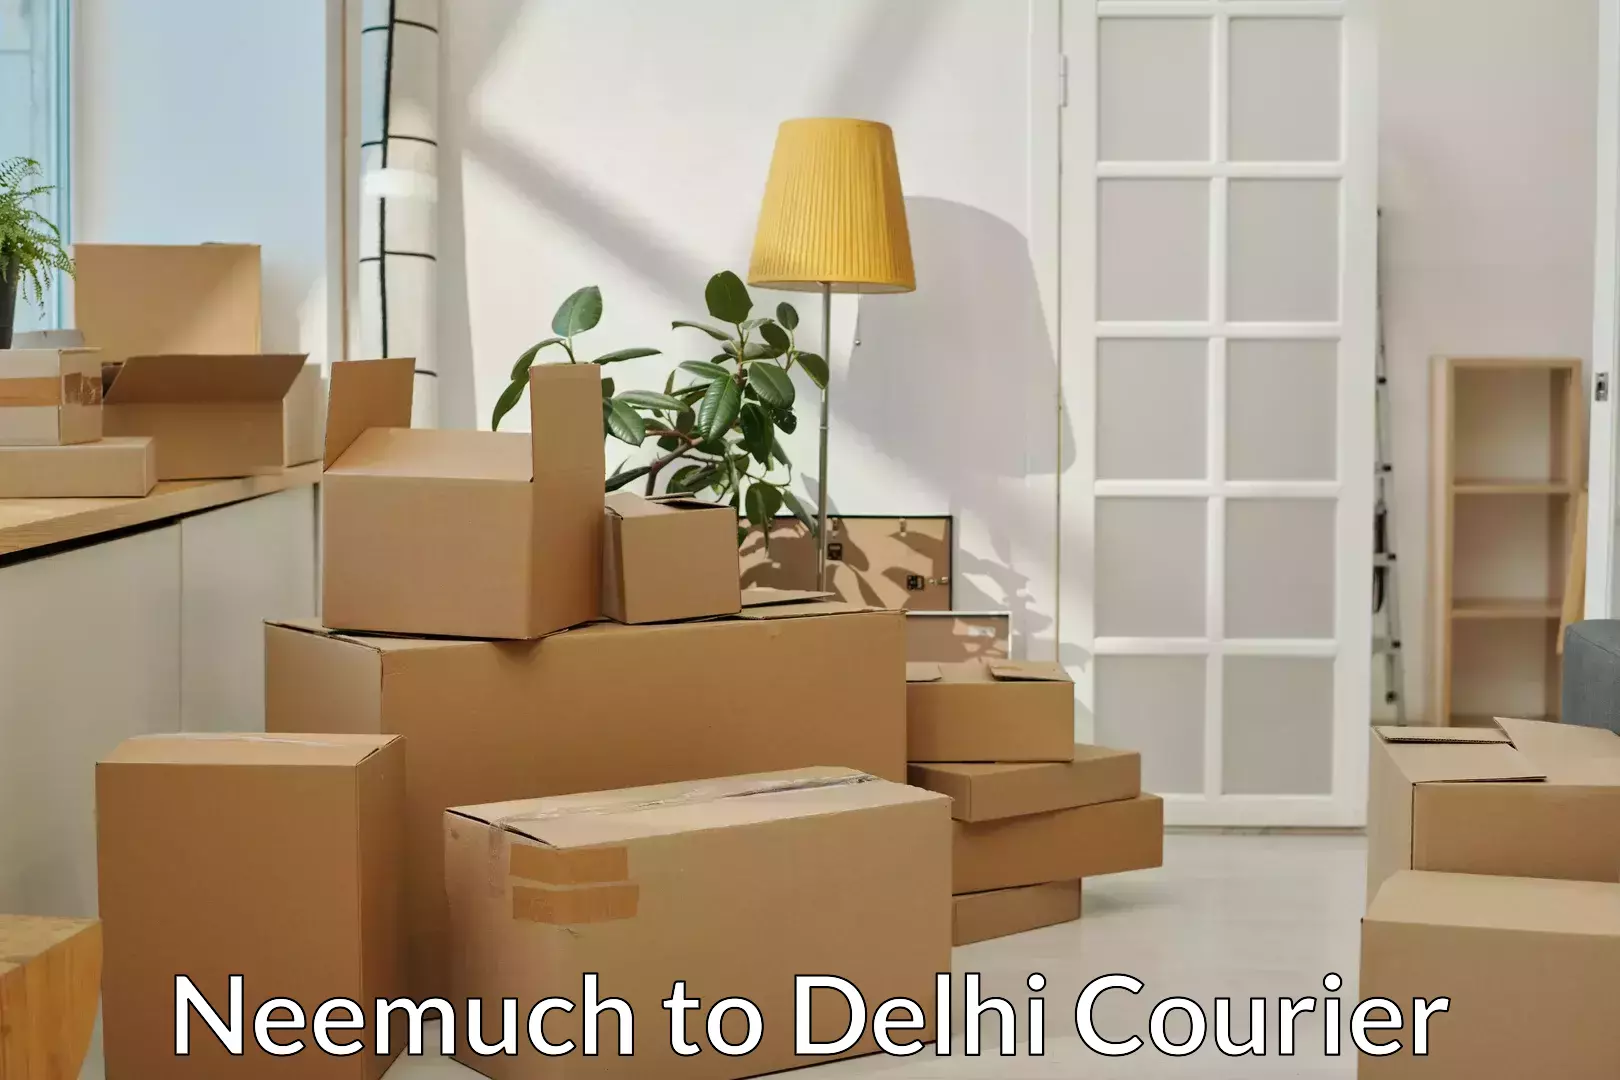 Furniture transport specialists Neemuch to NCR